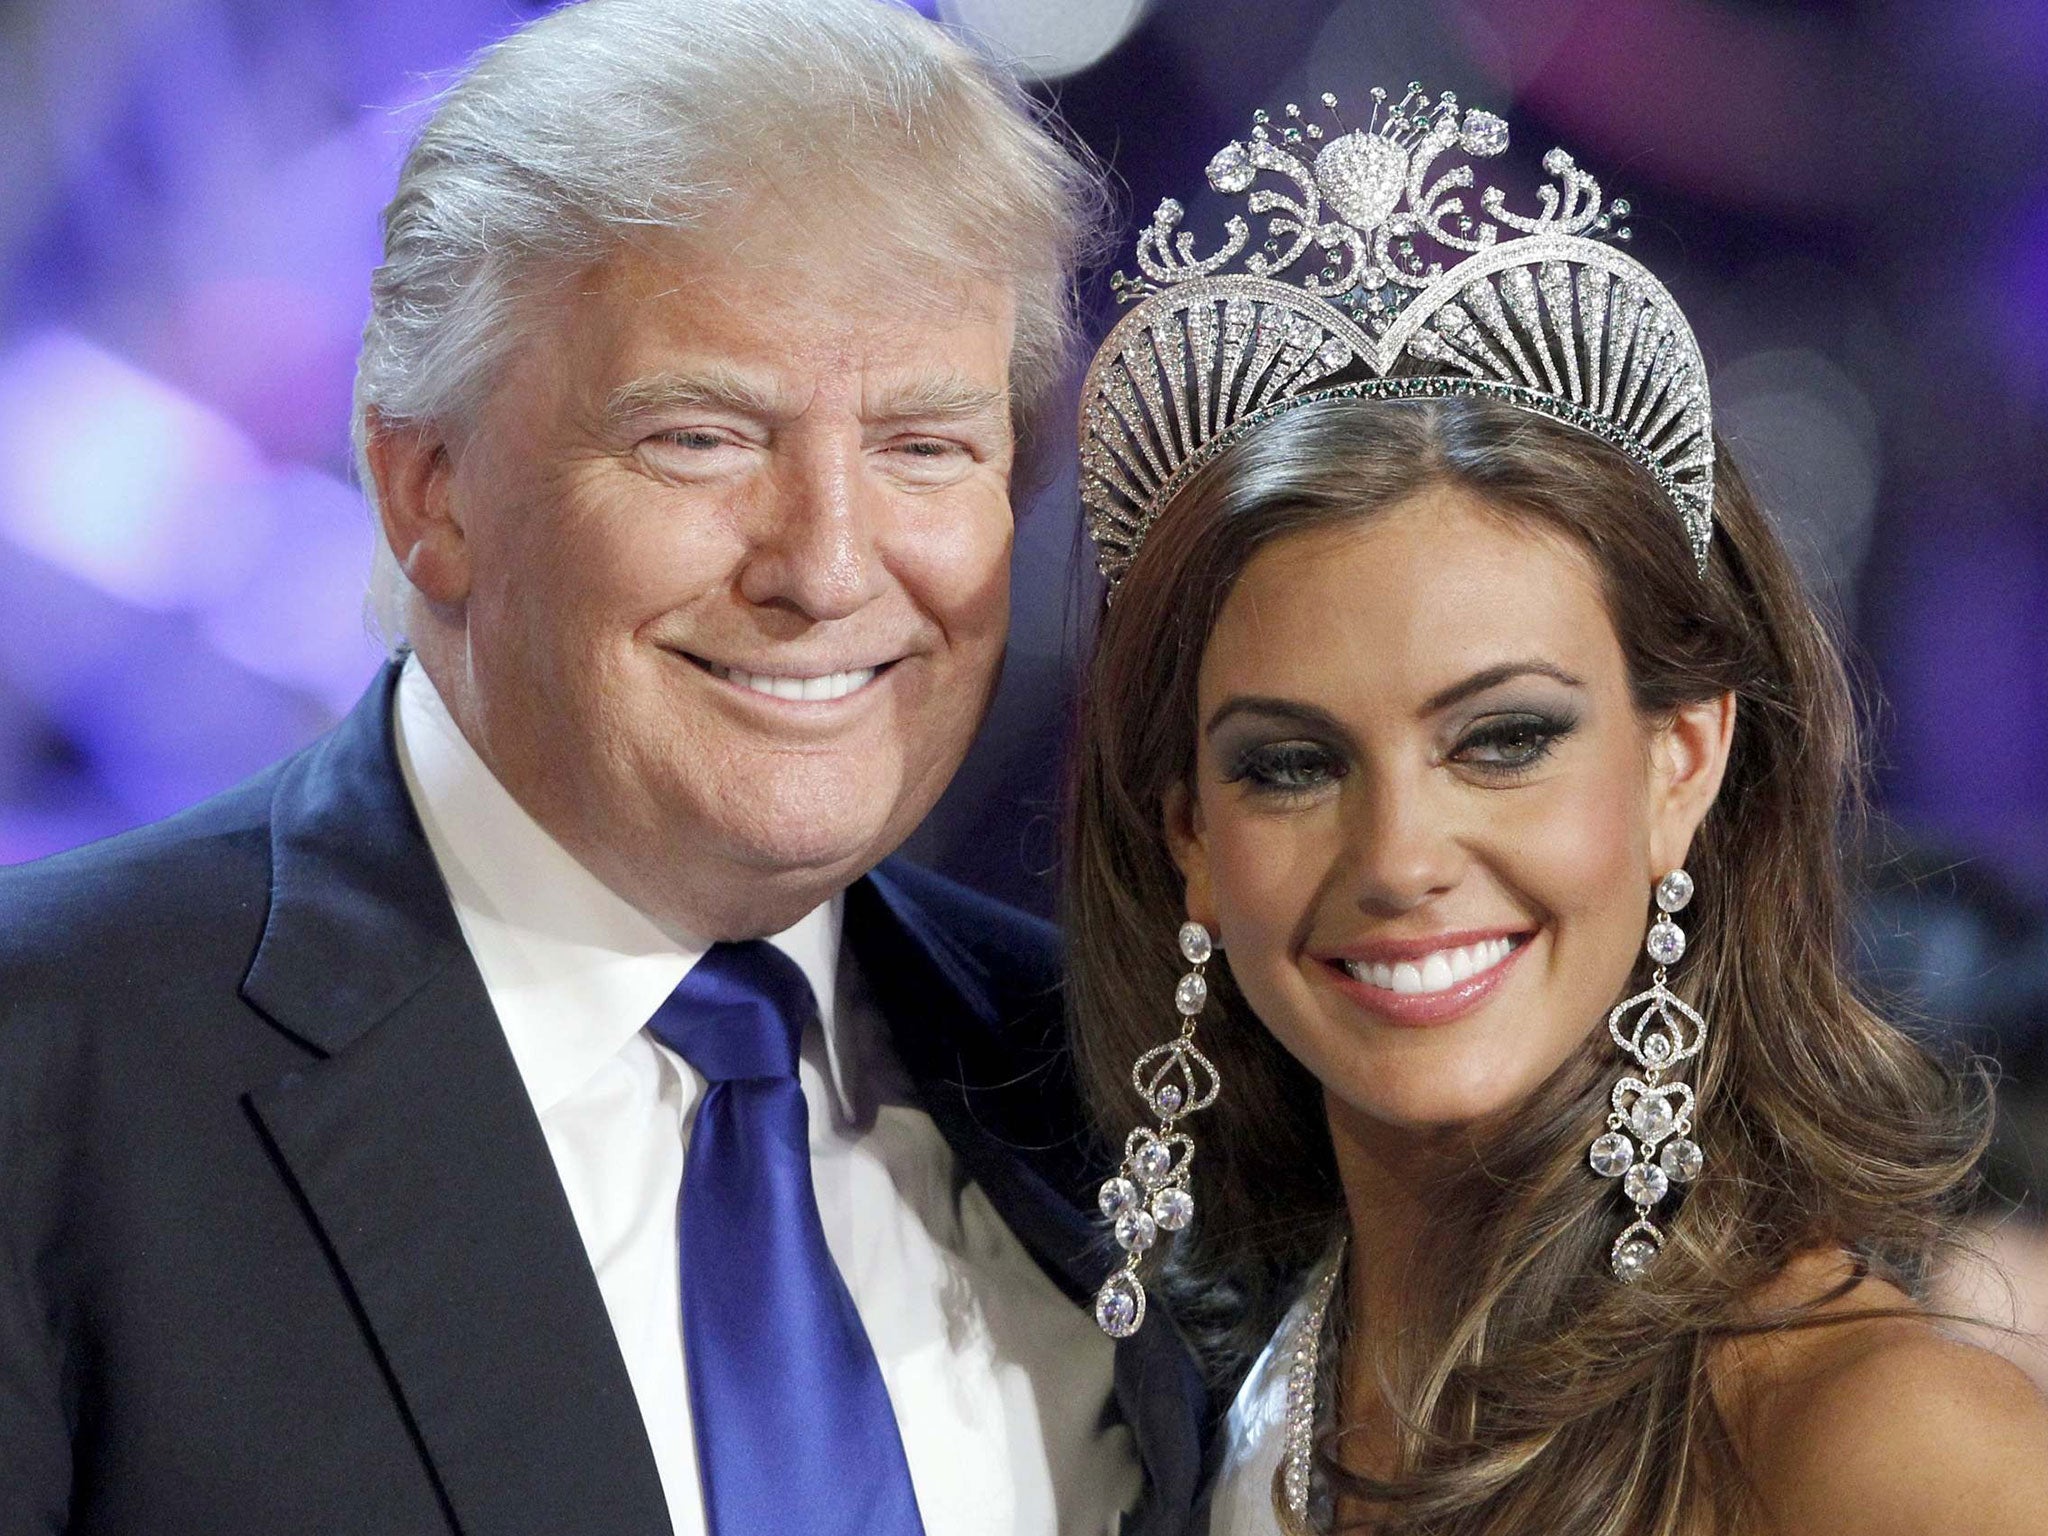 The move gives Donald Trump full ownership of the Miss Universe and Miss USA pageants